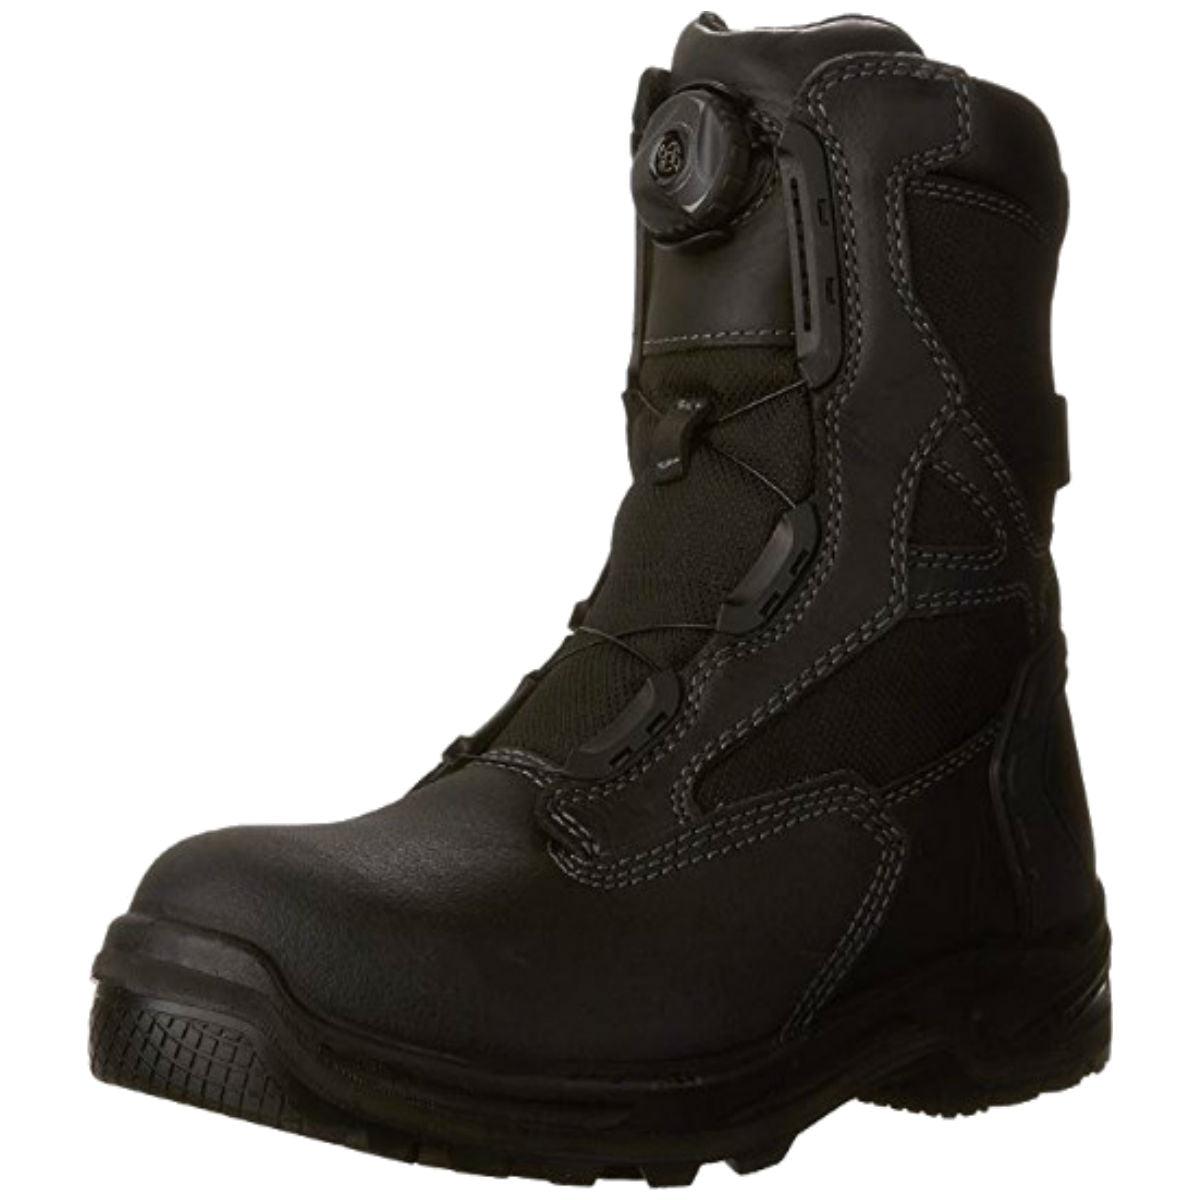 Boa Work Boots Terra Rexton BOA® Best for Motorcycle & Work - American Legend Rider